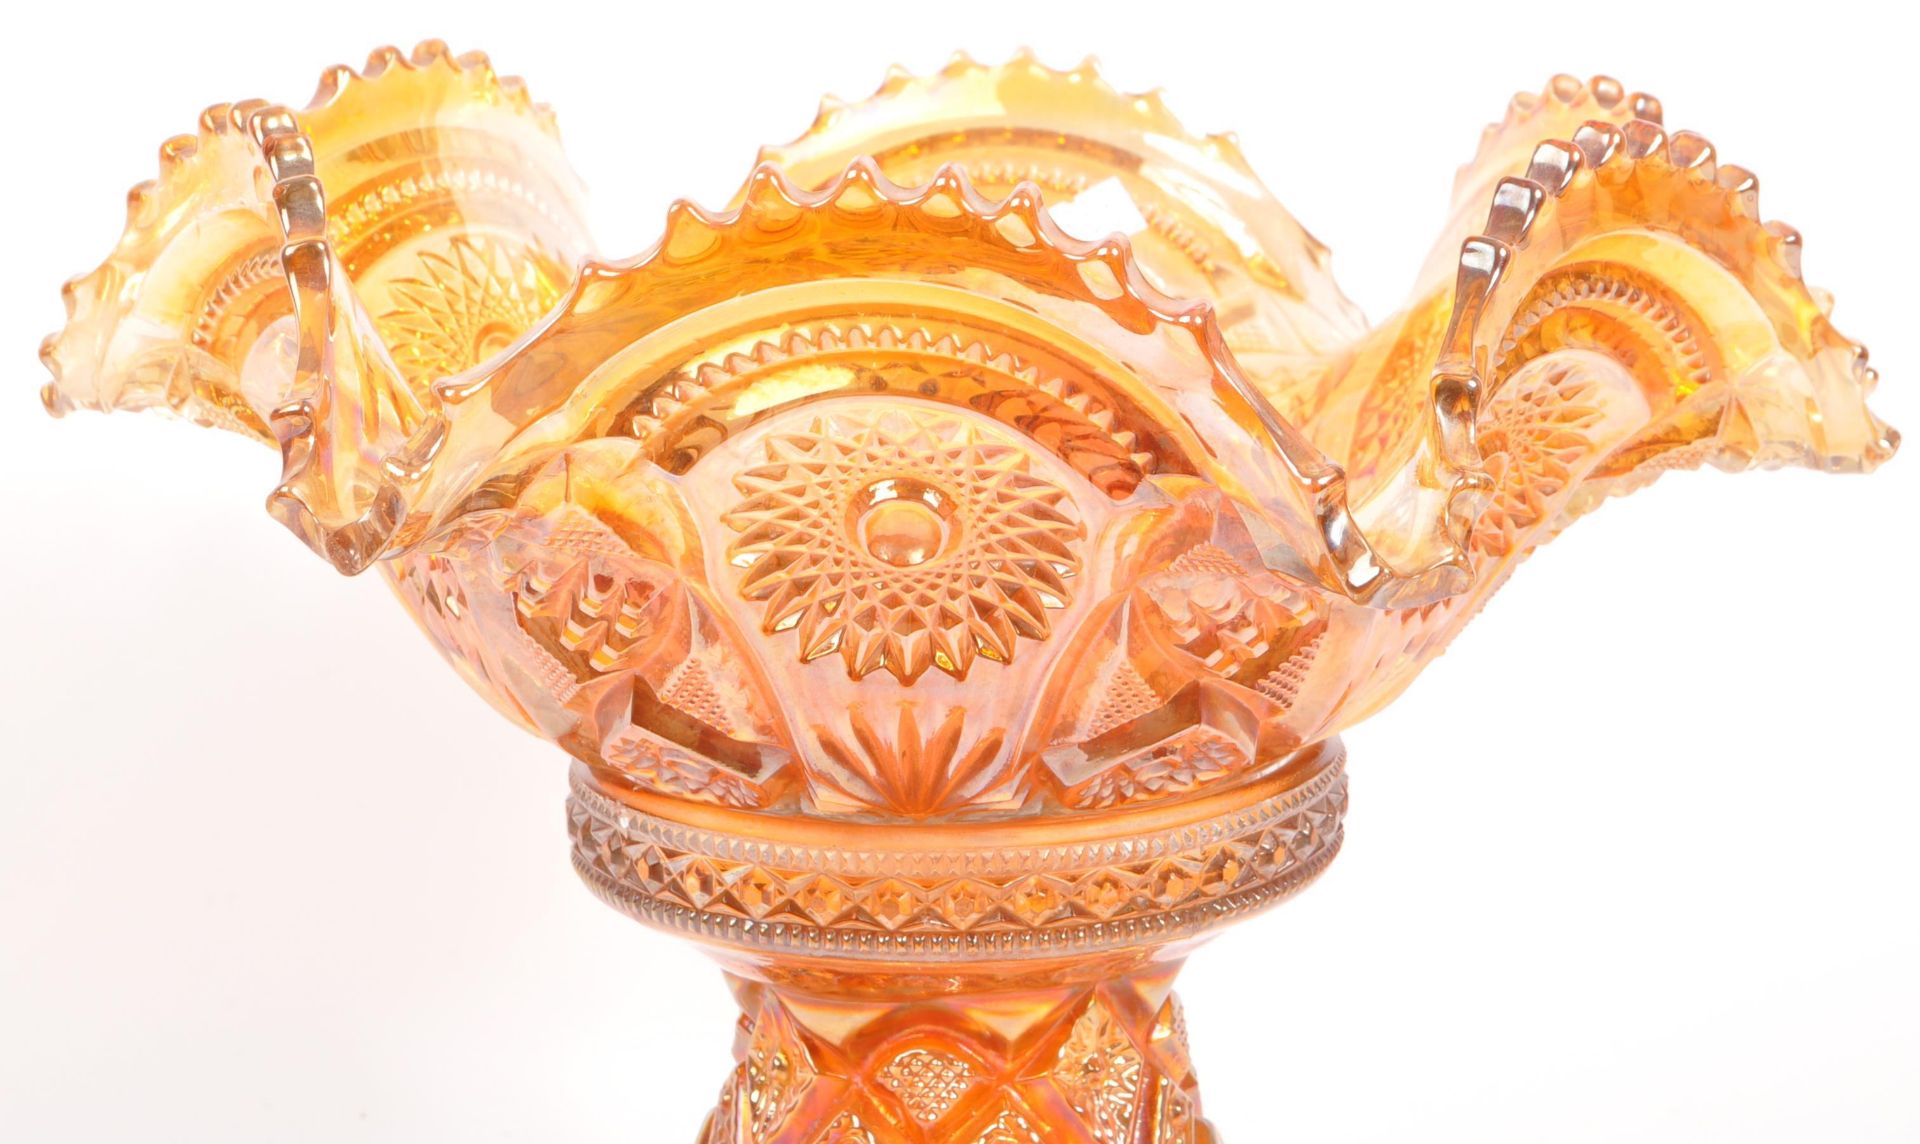 IRIDESCENT CARNIVAL GLASS MARIGOLD PUNCH BOWL - Image 3 of 10